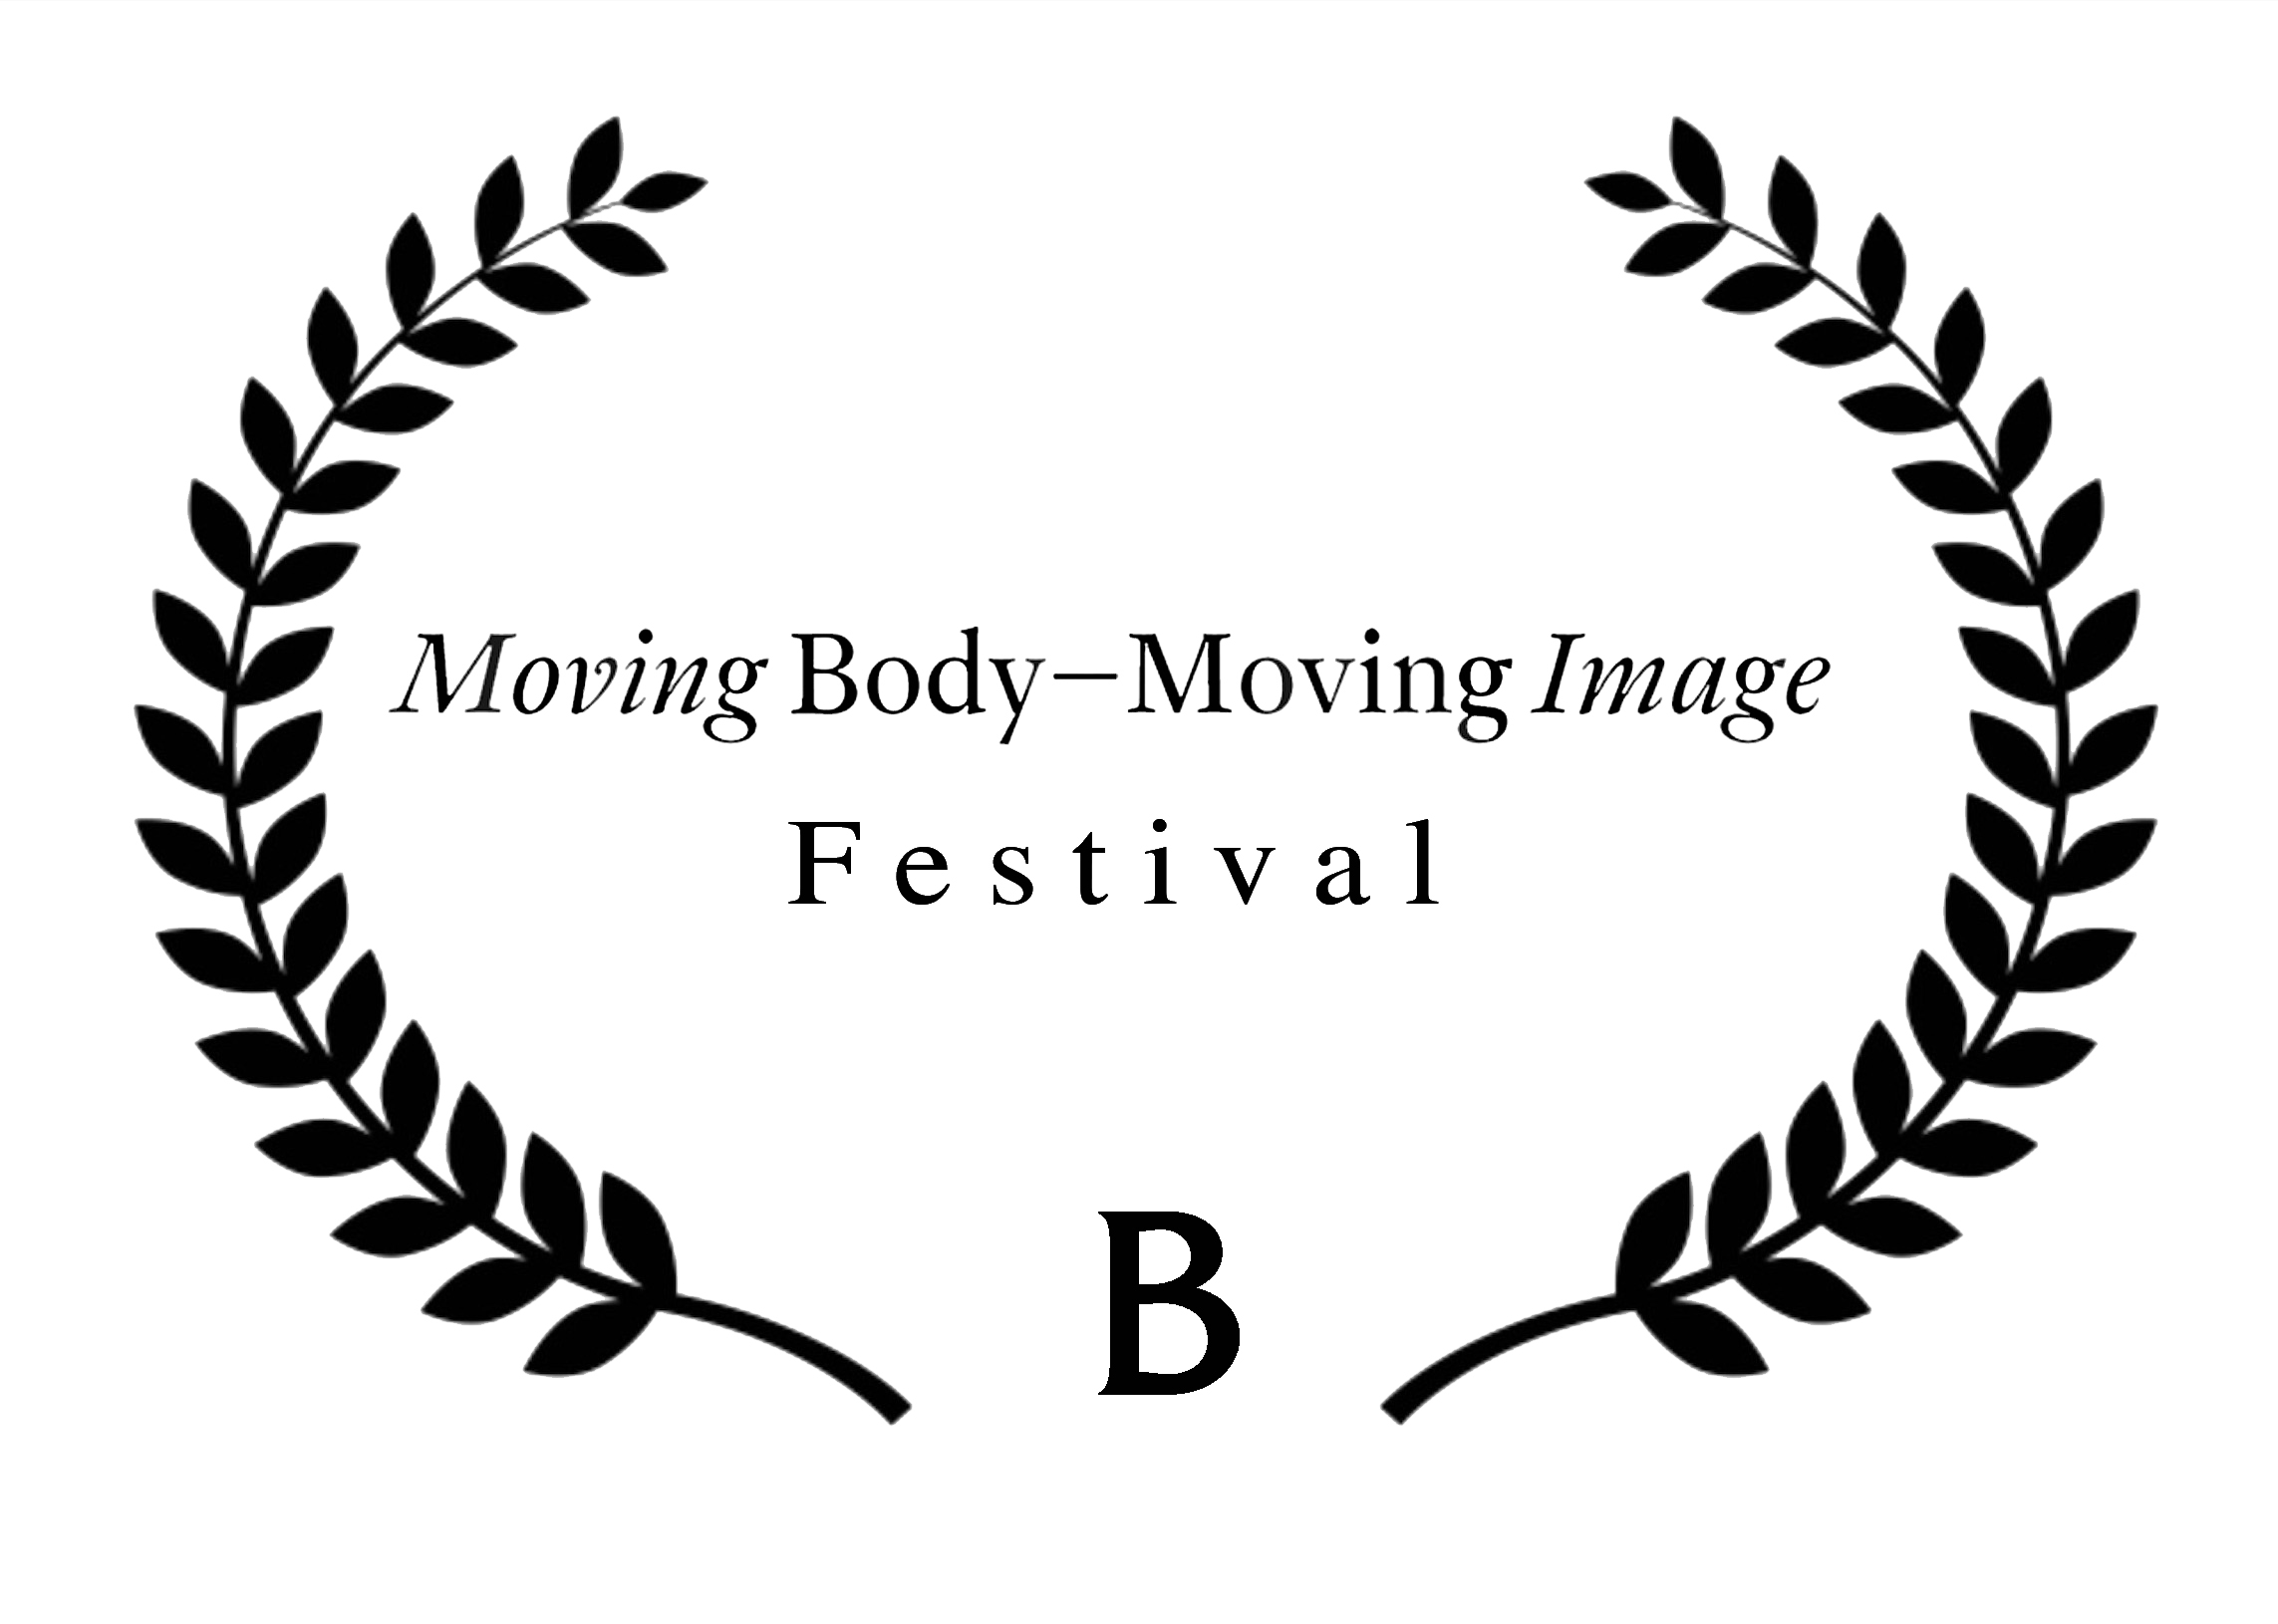 Moving Body-Moving Image Festival Logo with laurels